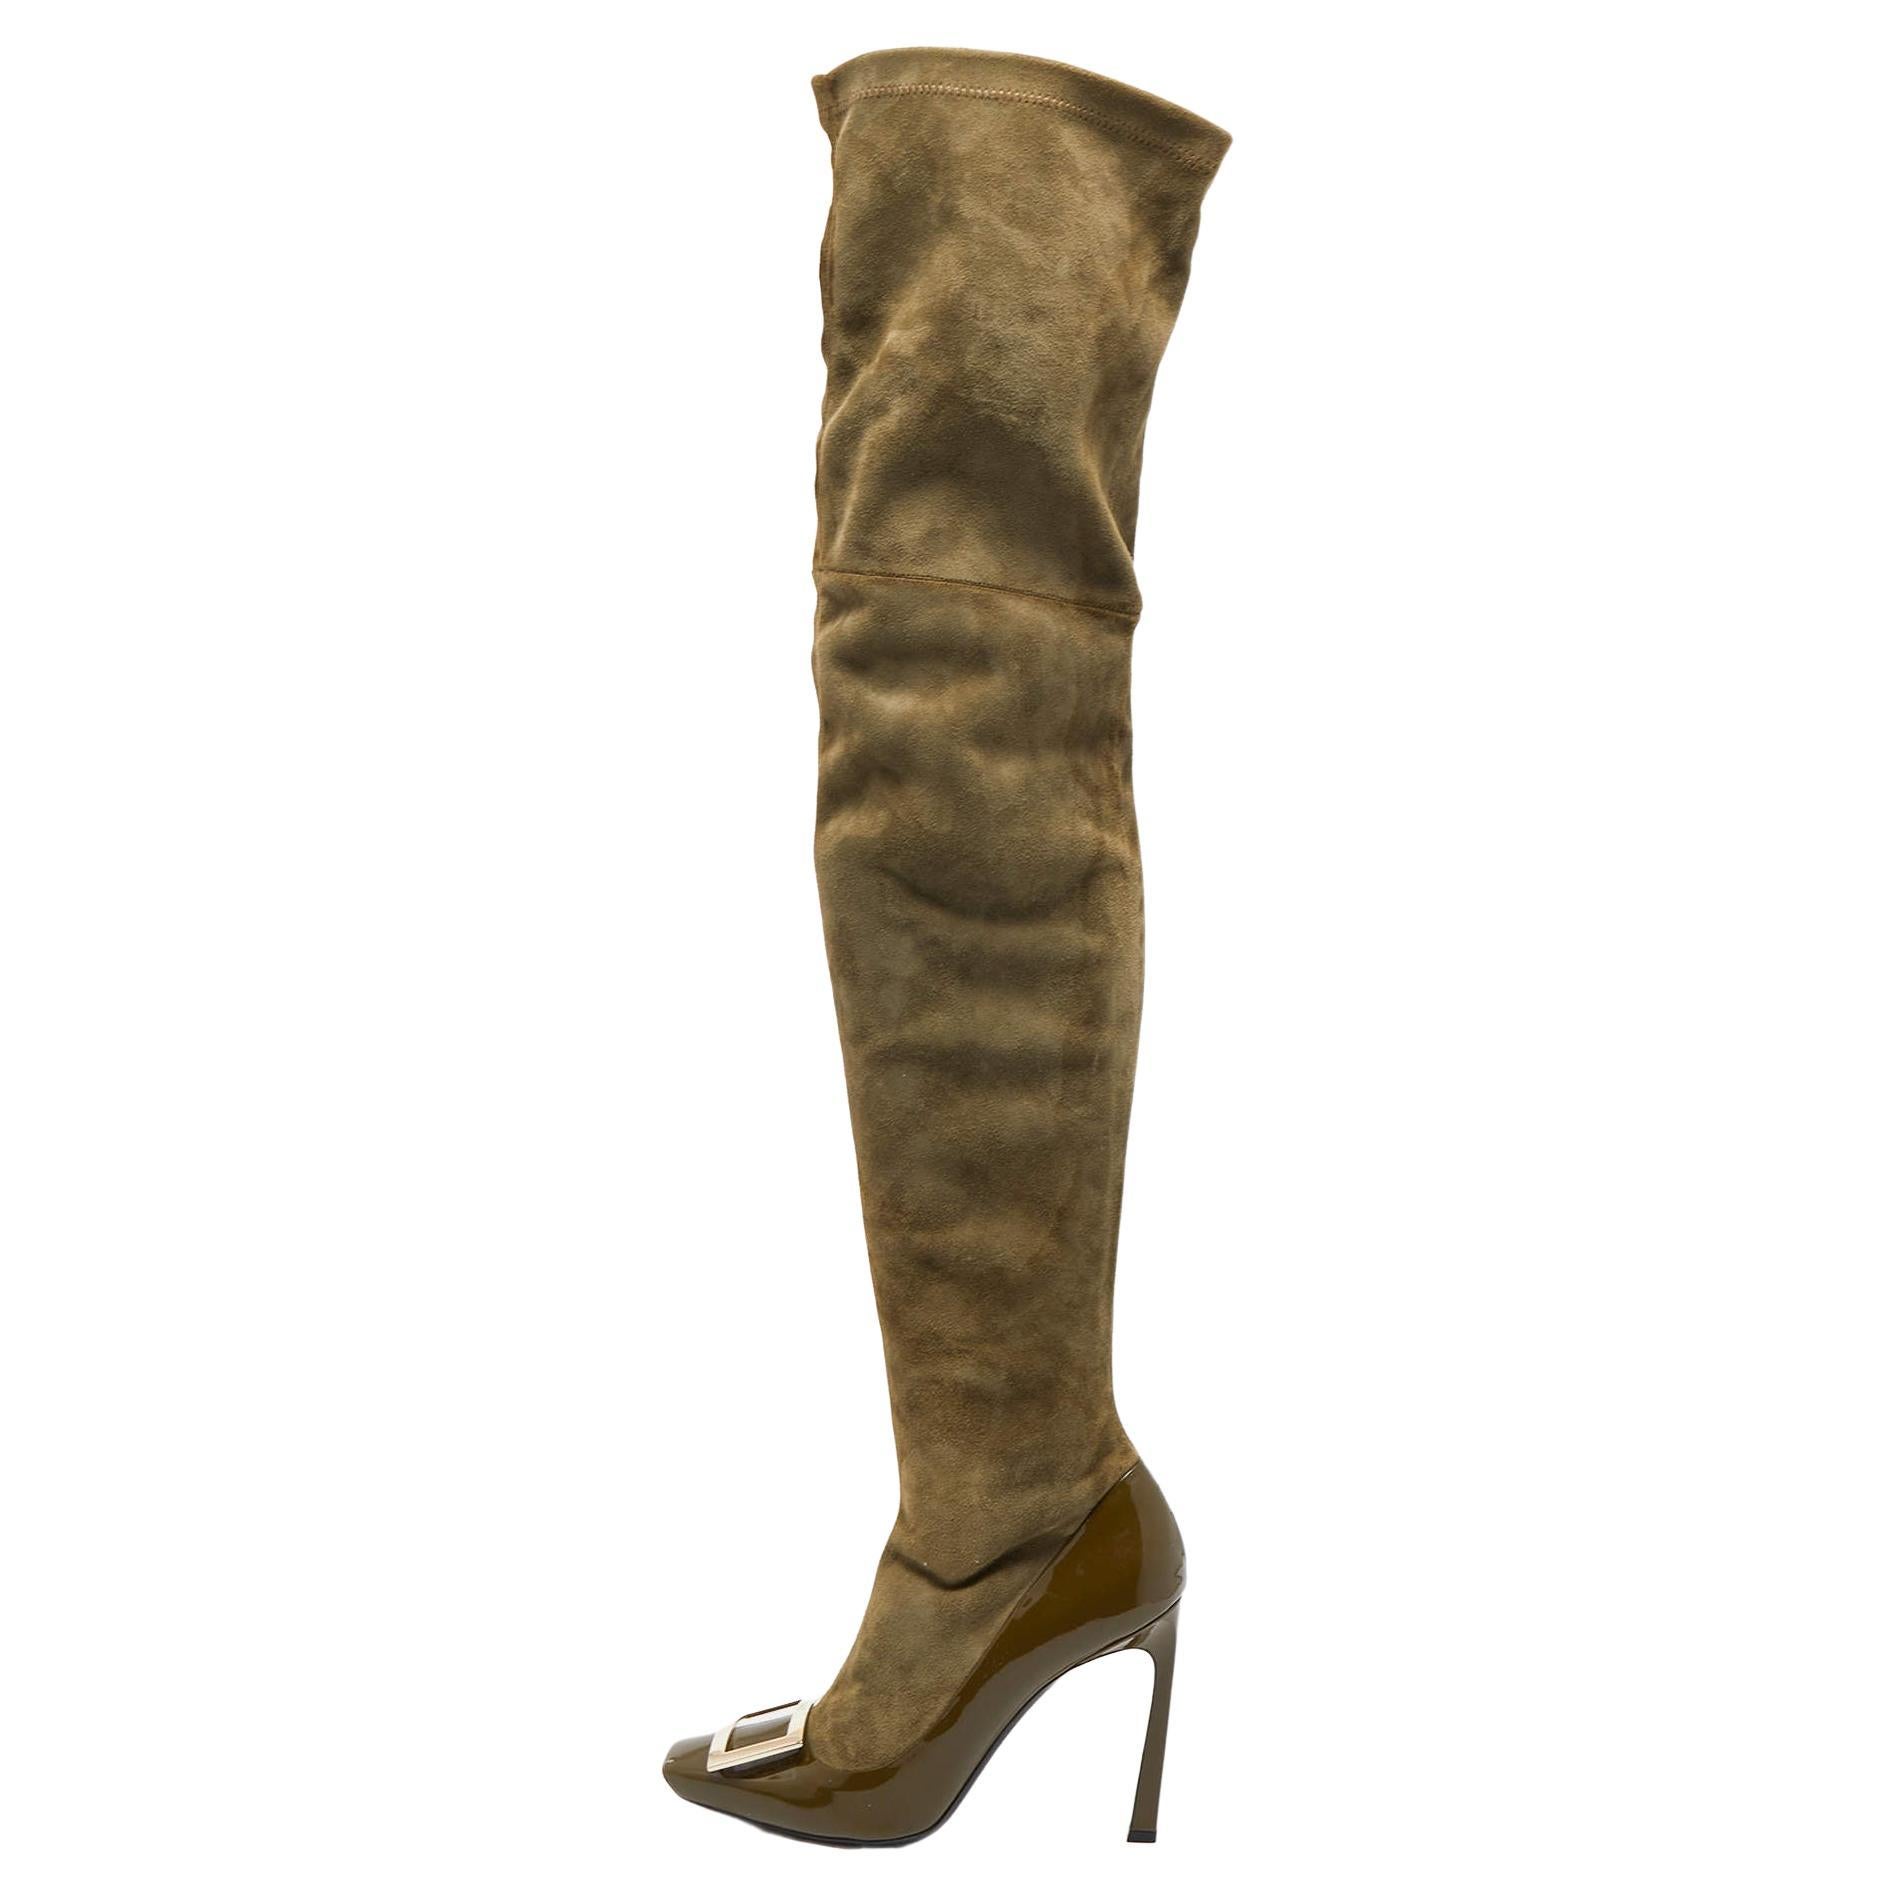 Roger Vivier Olive Green Patent Leather Suede Over The Knee Length Boots Size 40